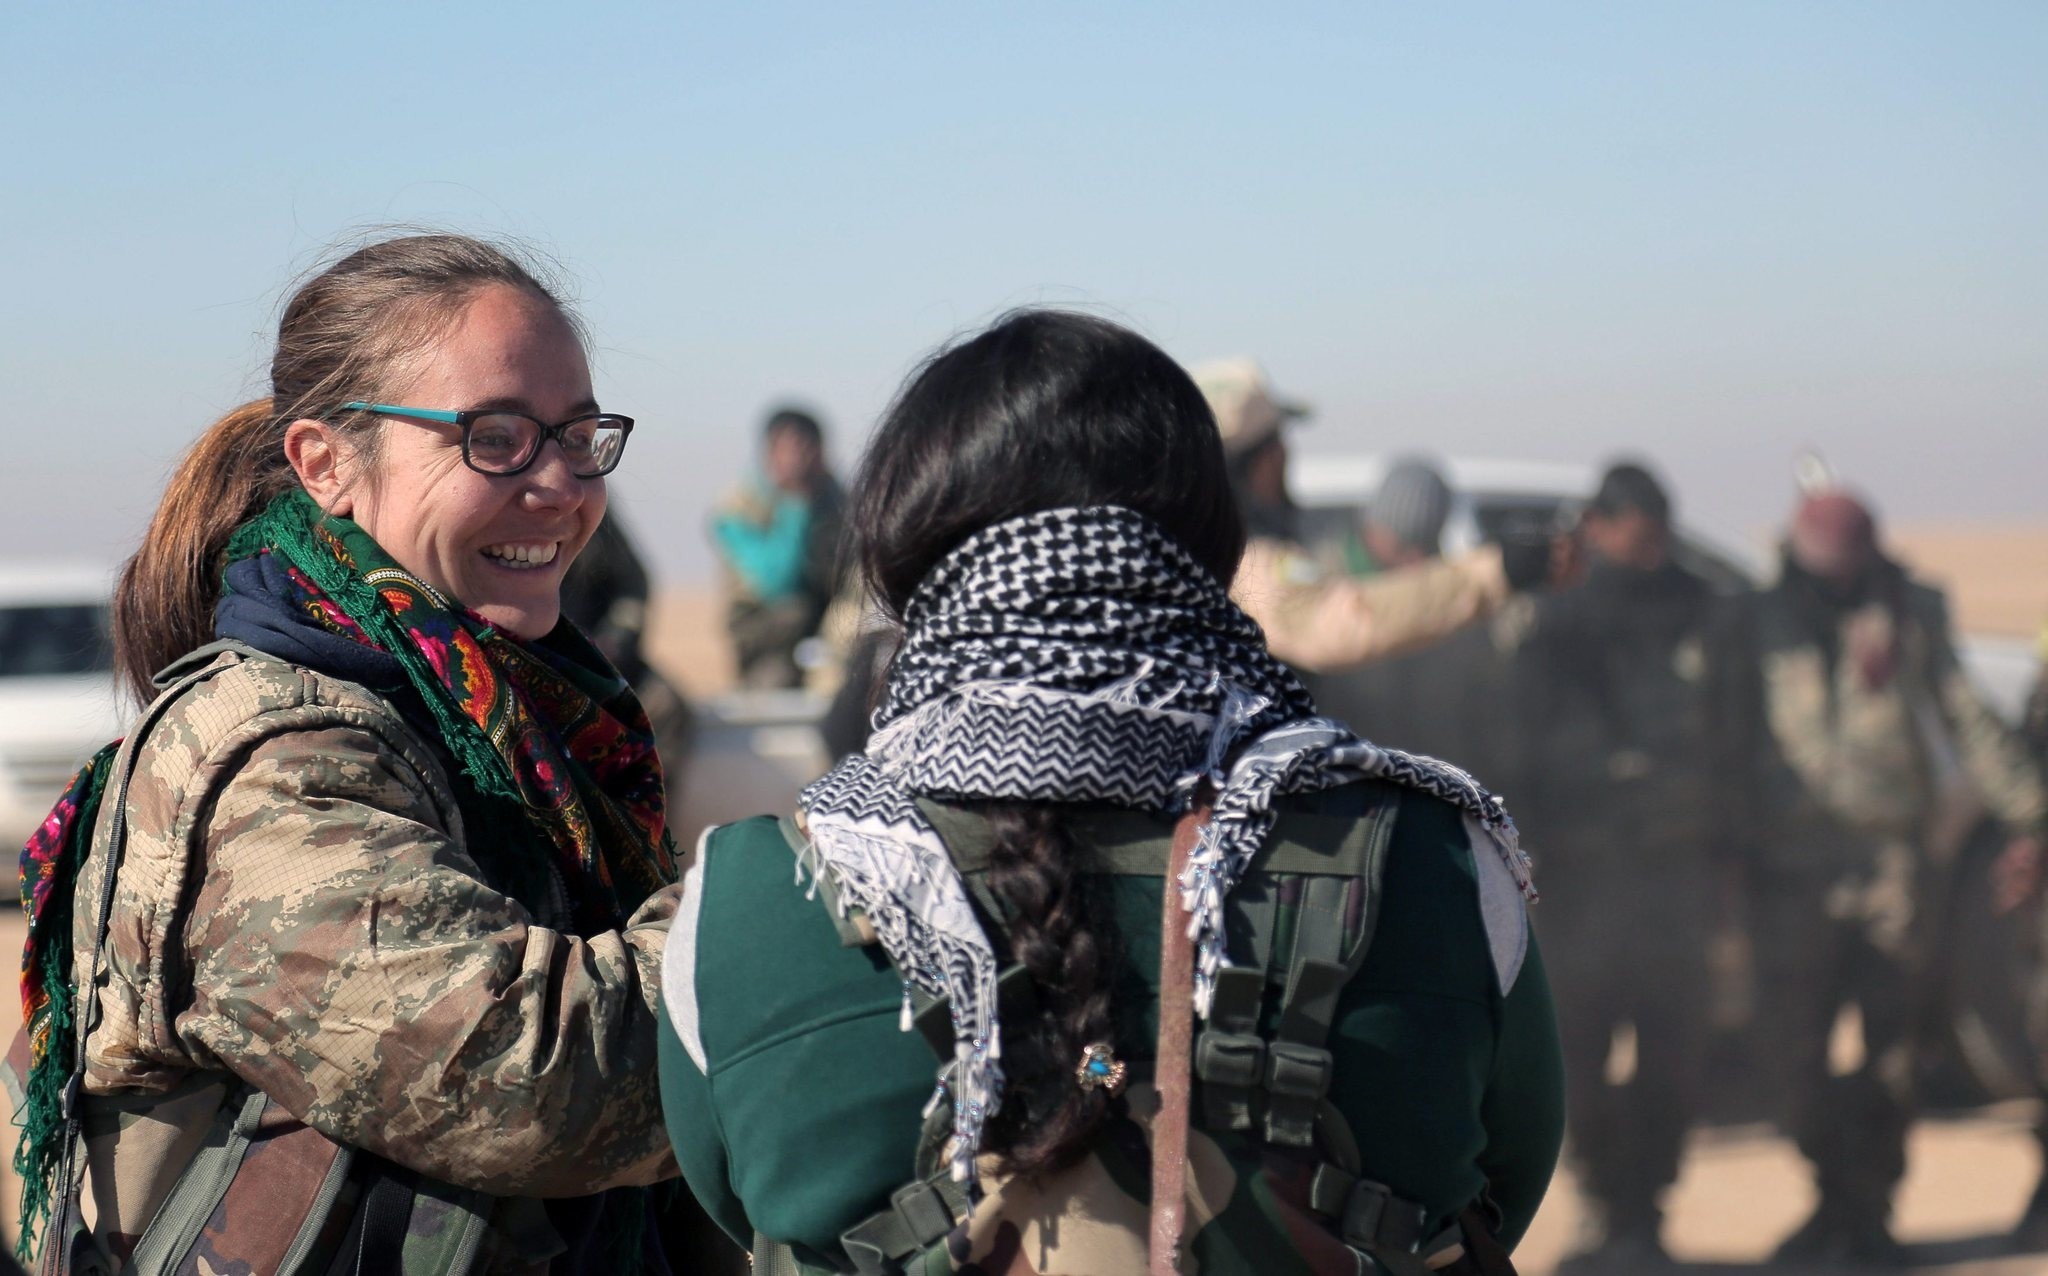 A volunteer British fighter talks with a member of the Syrian Democratic Forces (SDF), north of Raqqa, Syria, Feb. 3, 2017.